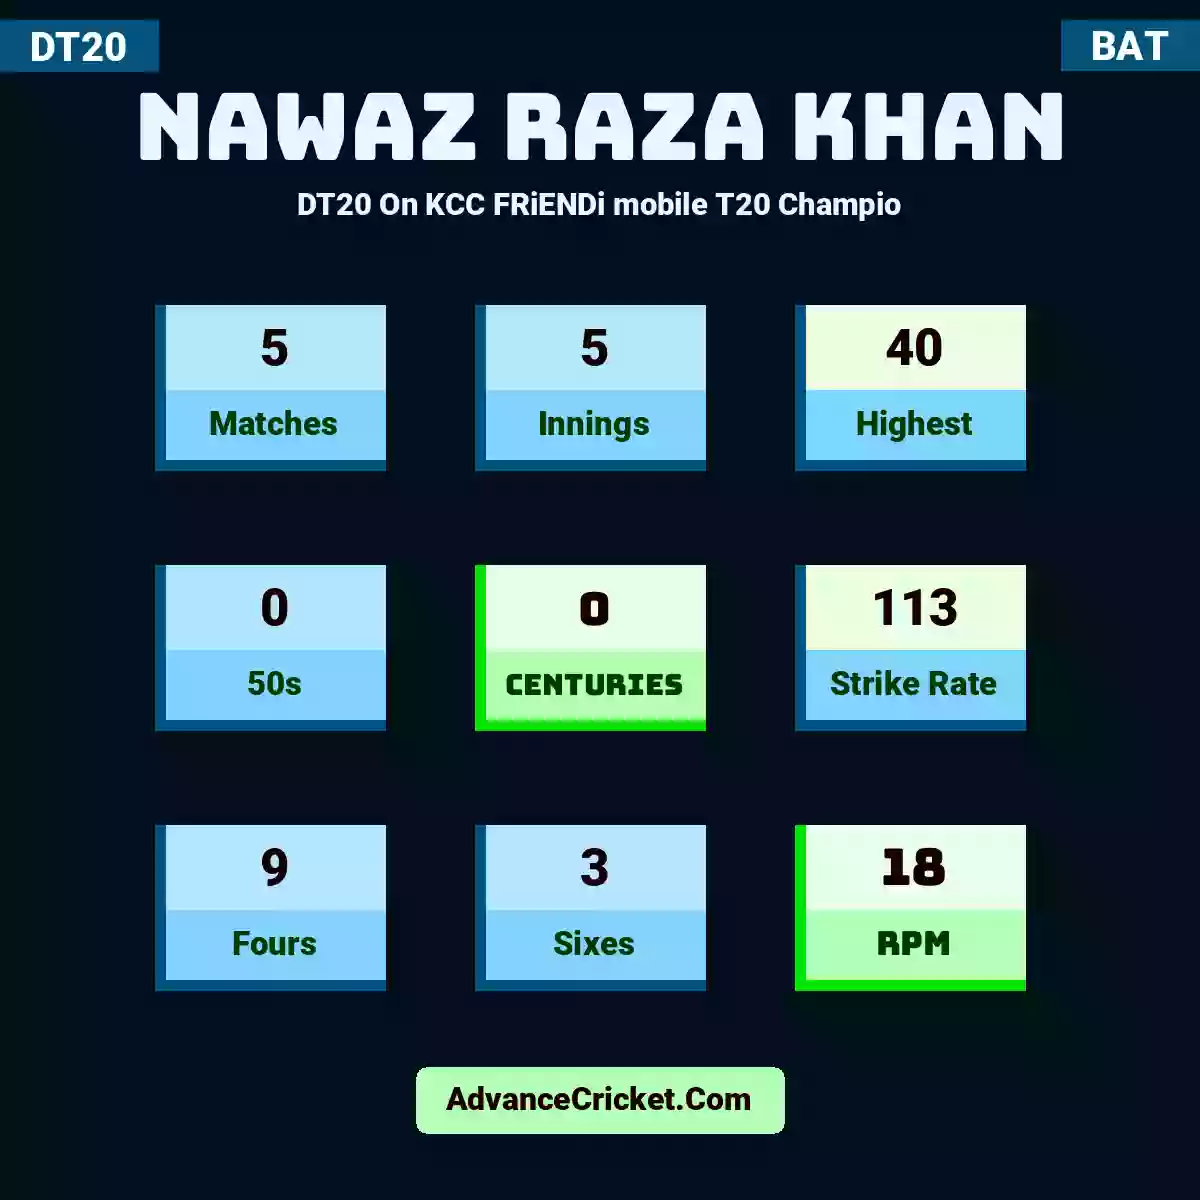 Nawaz Raza Khan DT20  On KCC FRiENDi mobile T20 Champio, Nawaz Raza Khan played 5 matches, scored 40 runs as highest, 0 half-centuries, and 0 centuries, with a strike rate of 113. N.Raza.Khan hit 9 fours and 3 sixes, with an RPM of 18.